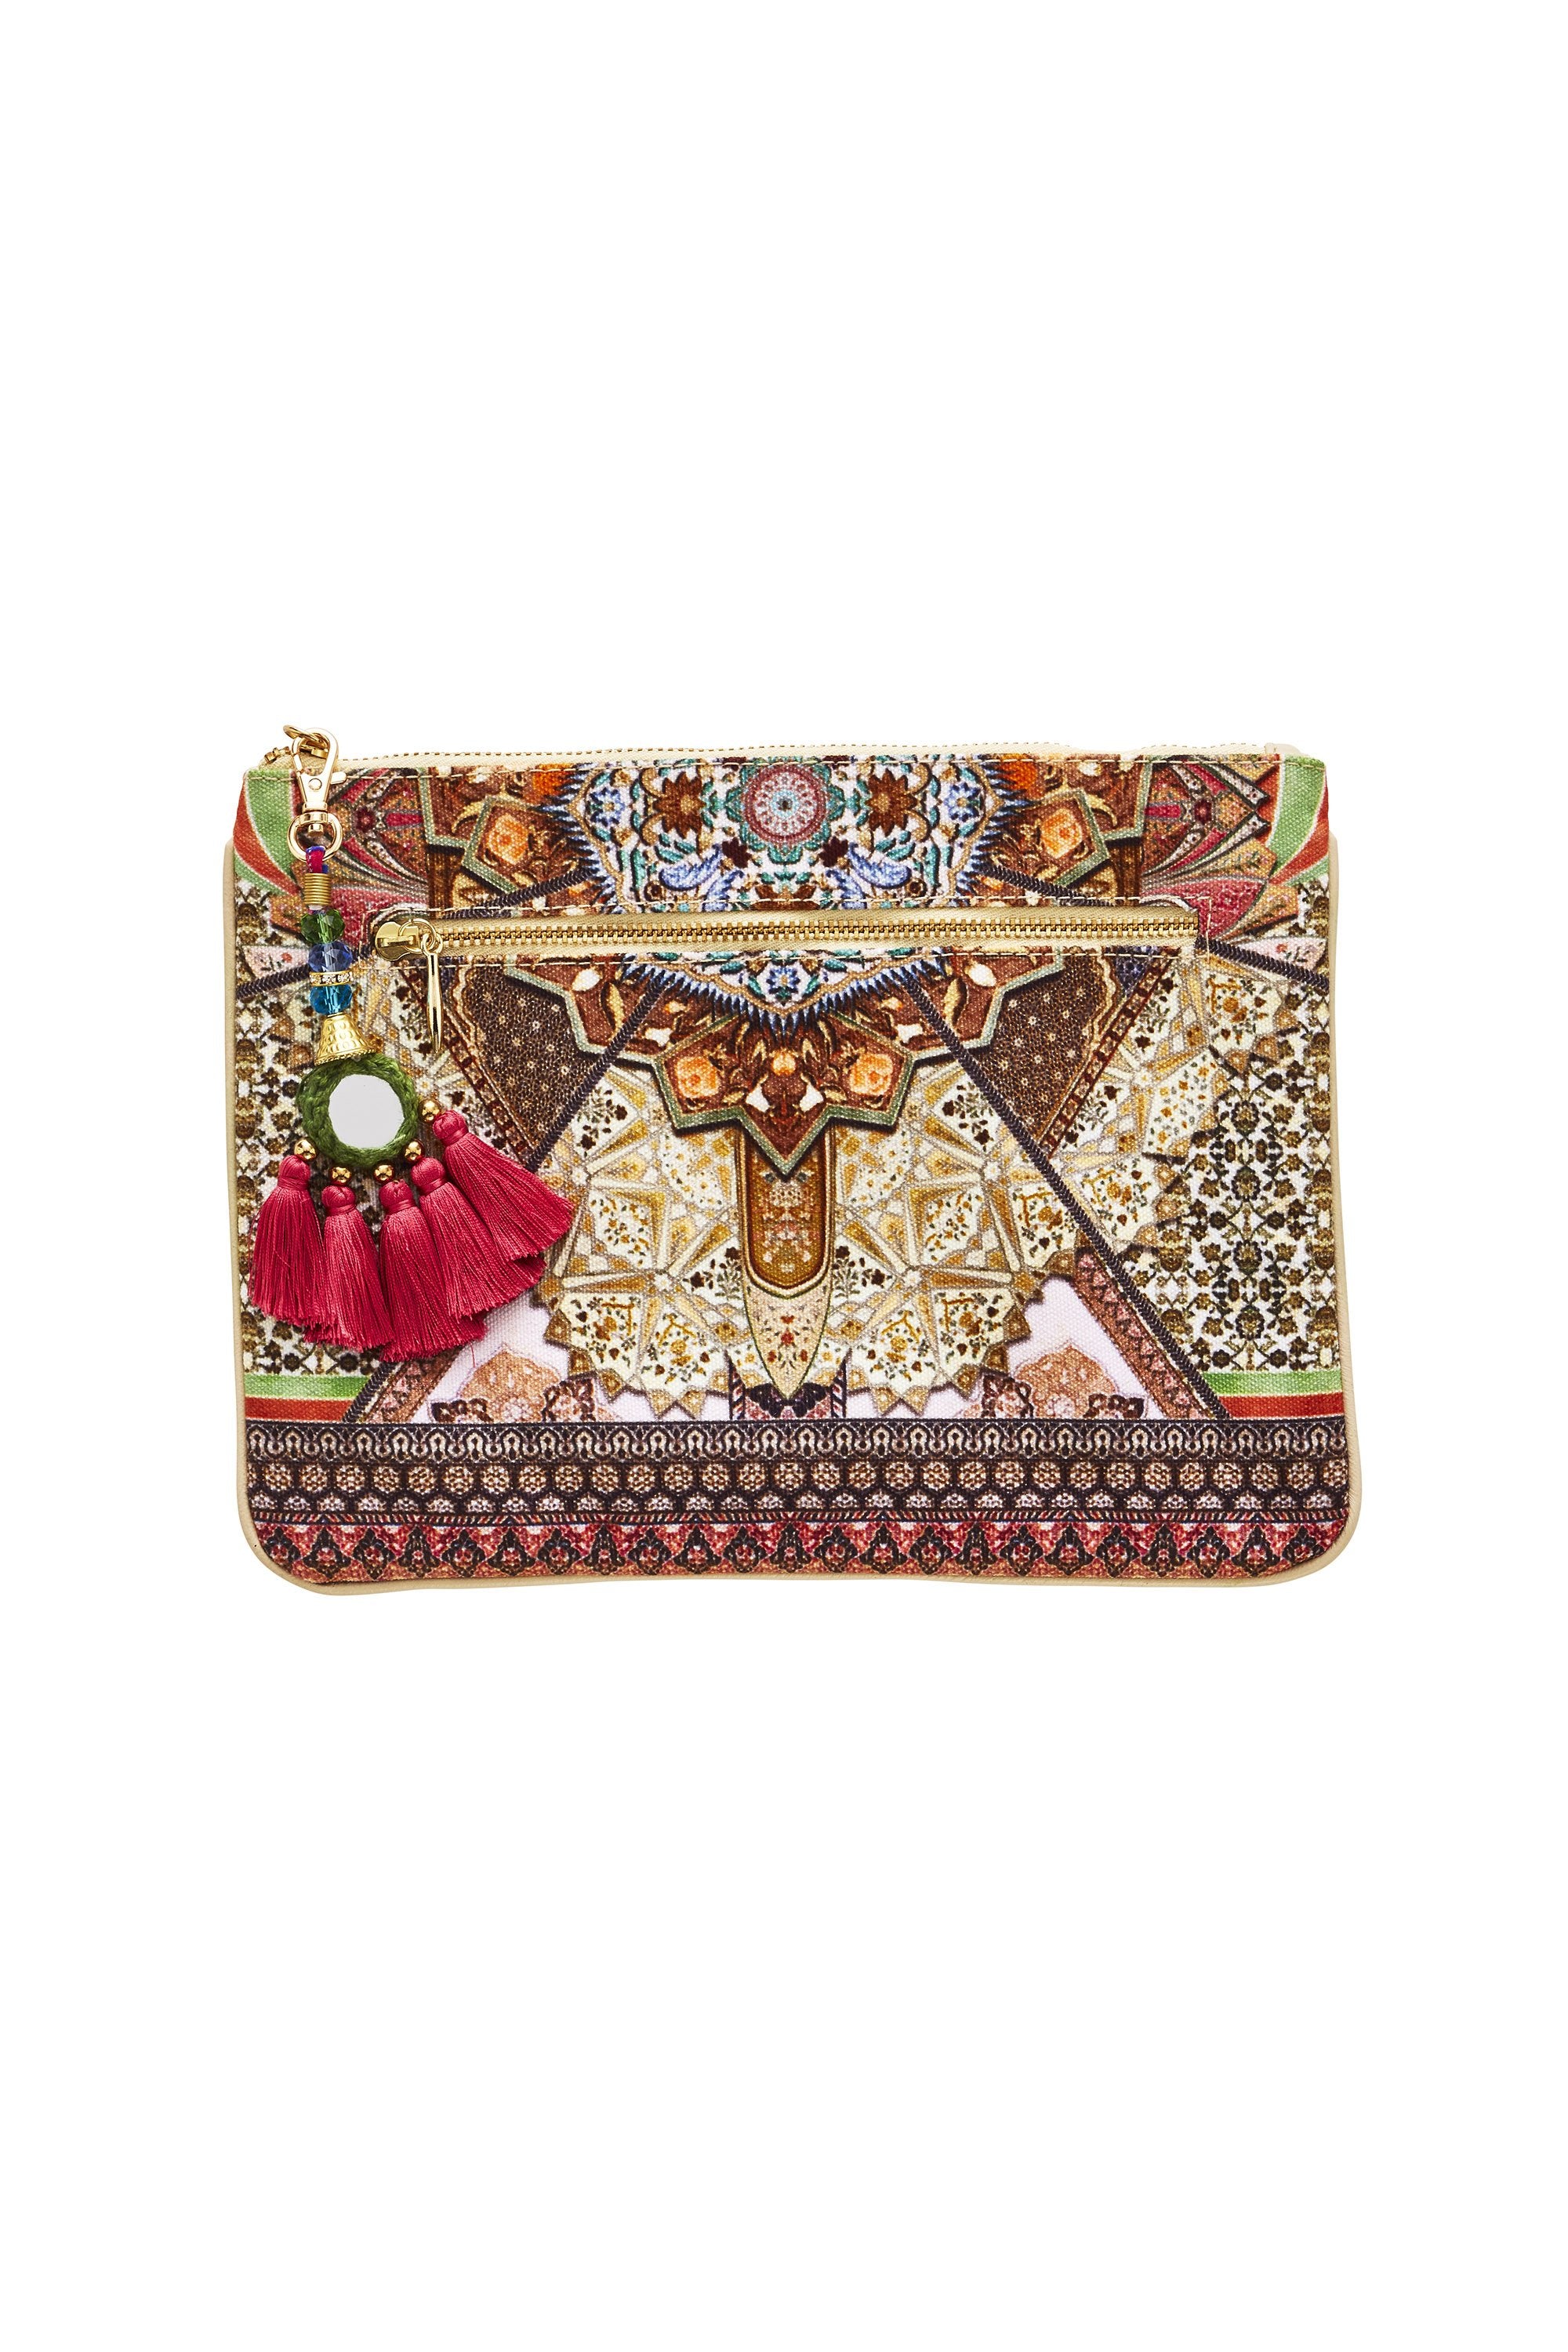 SOUL SISTERS SMALL CANVAS CLUTCH